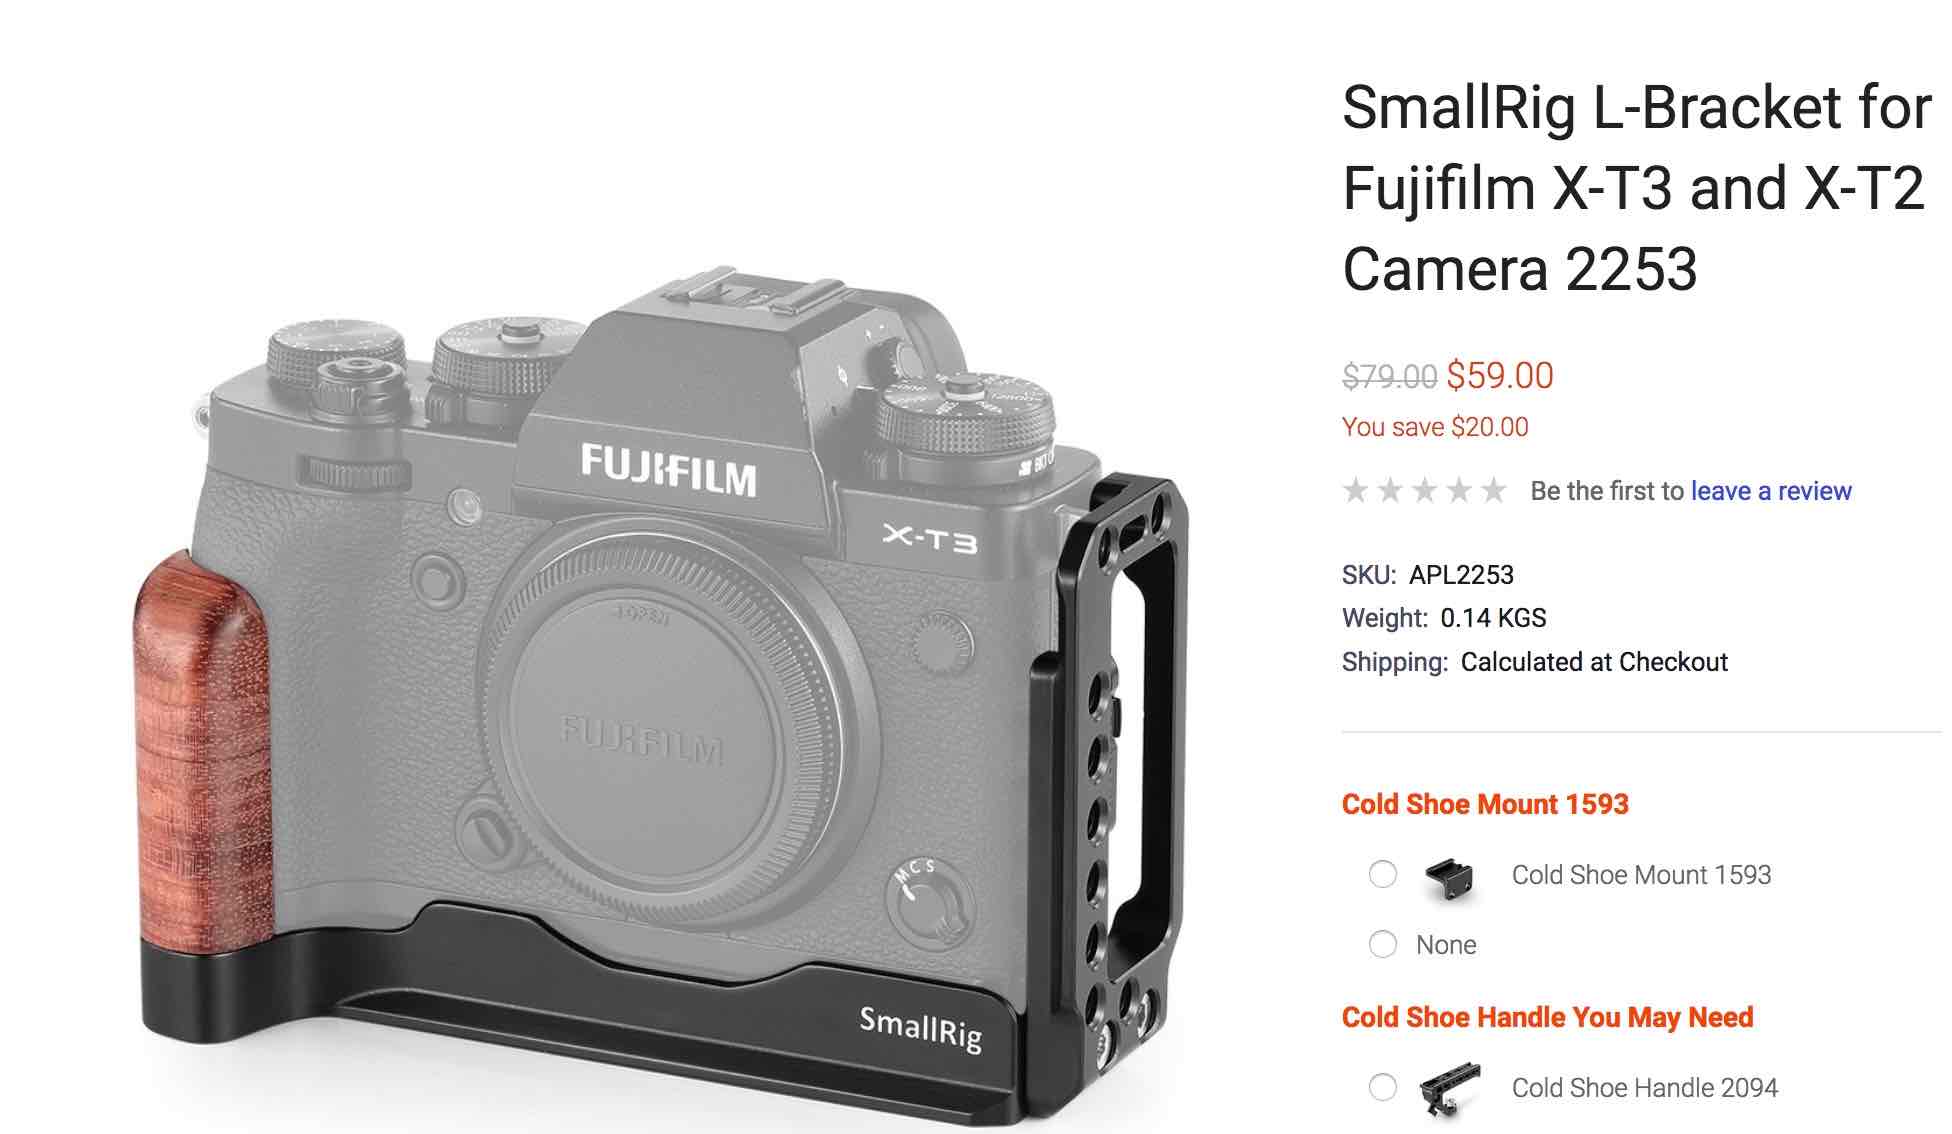 SmallRig L-Bracket for X-T3 and X-T2 Pre-order Open with $20 Discount - Fuji Rumors